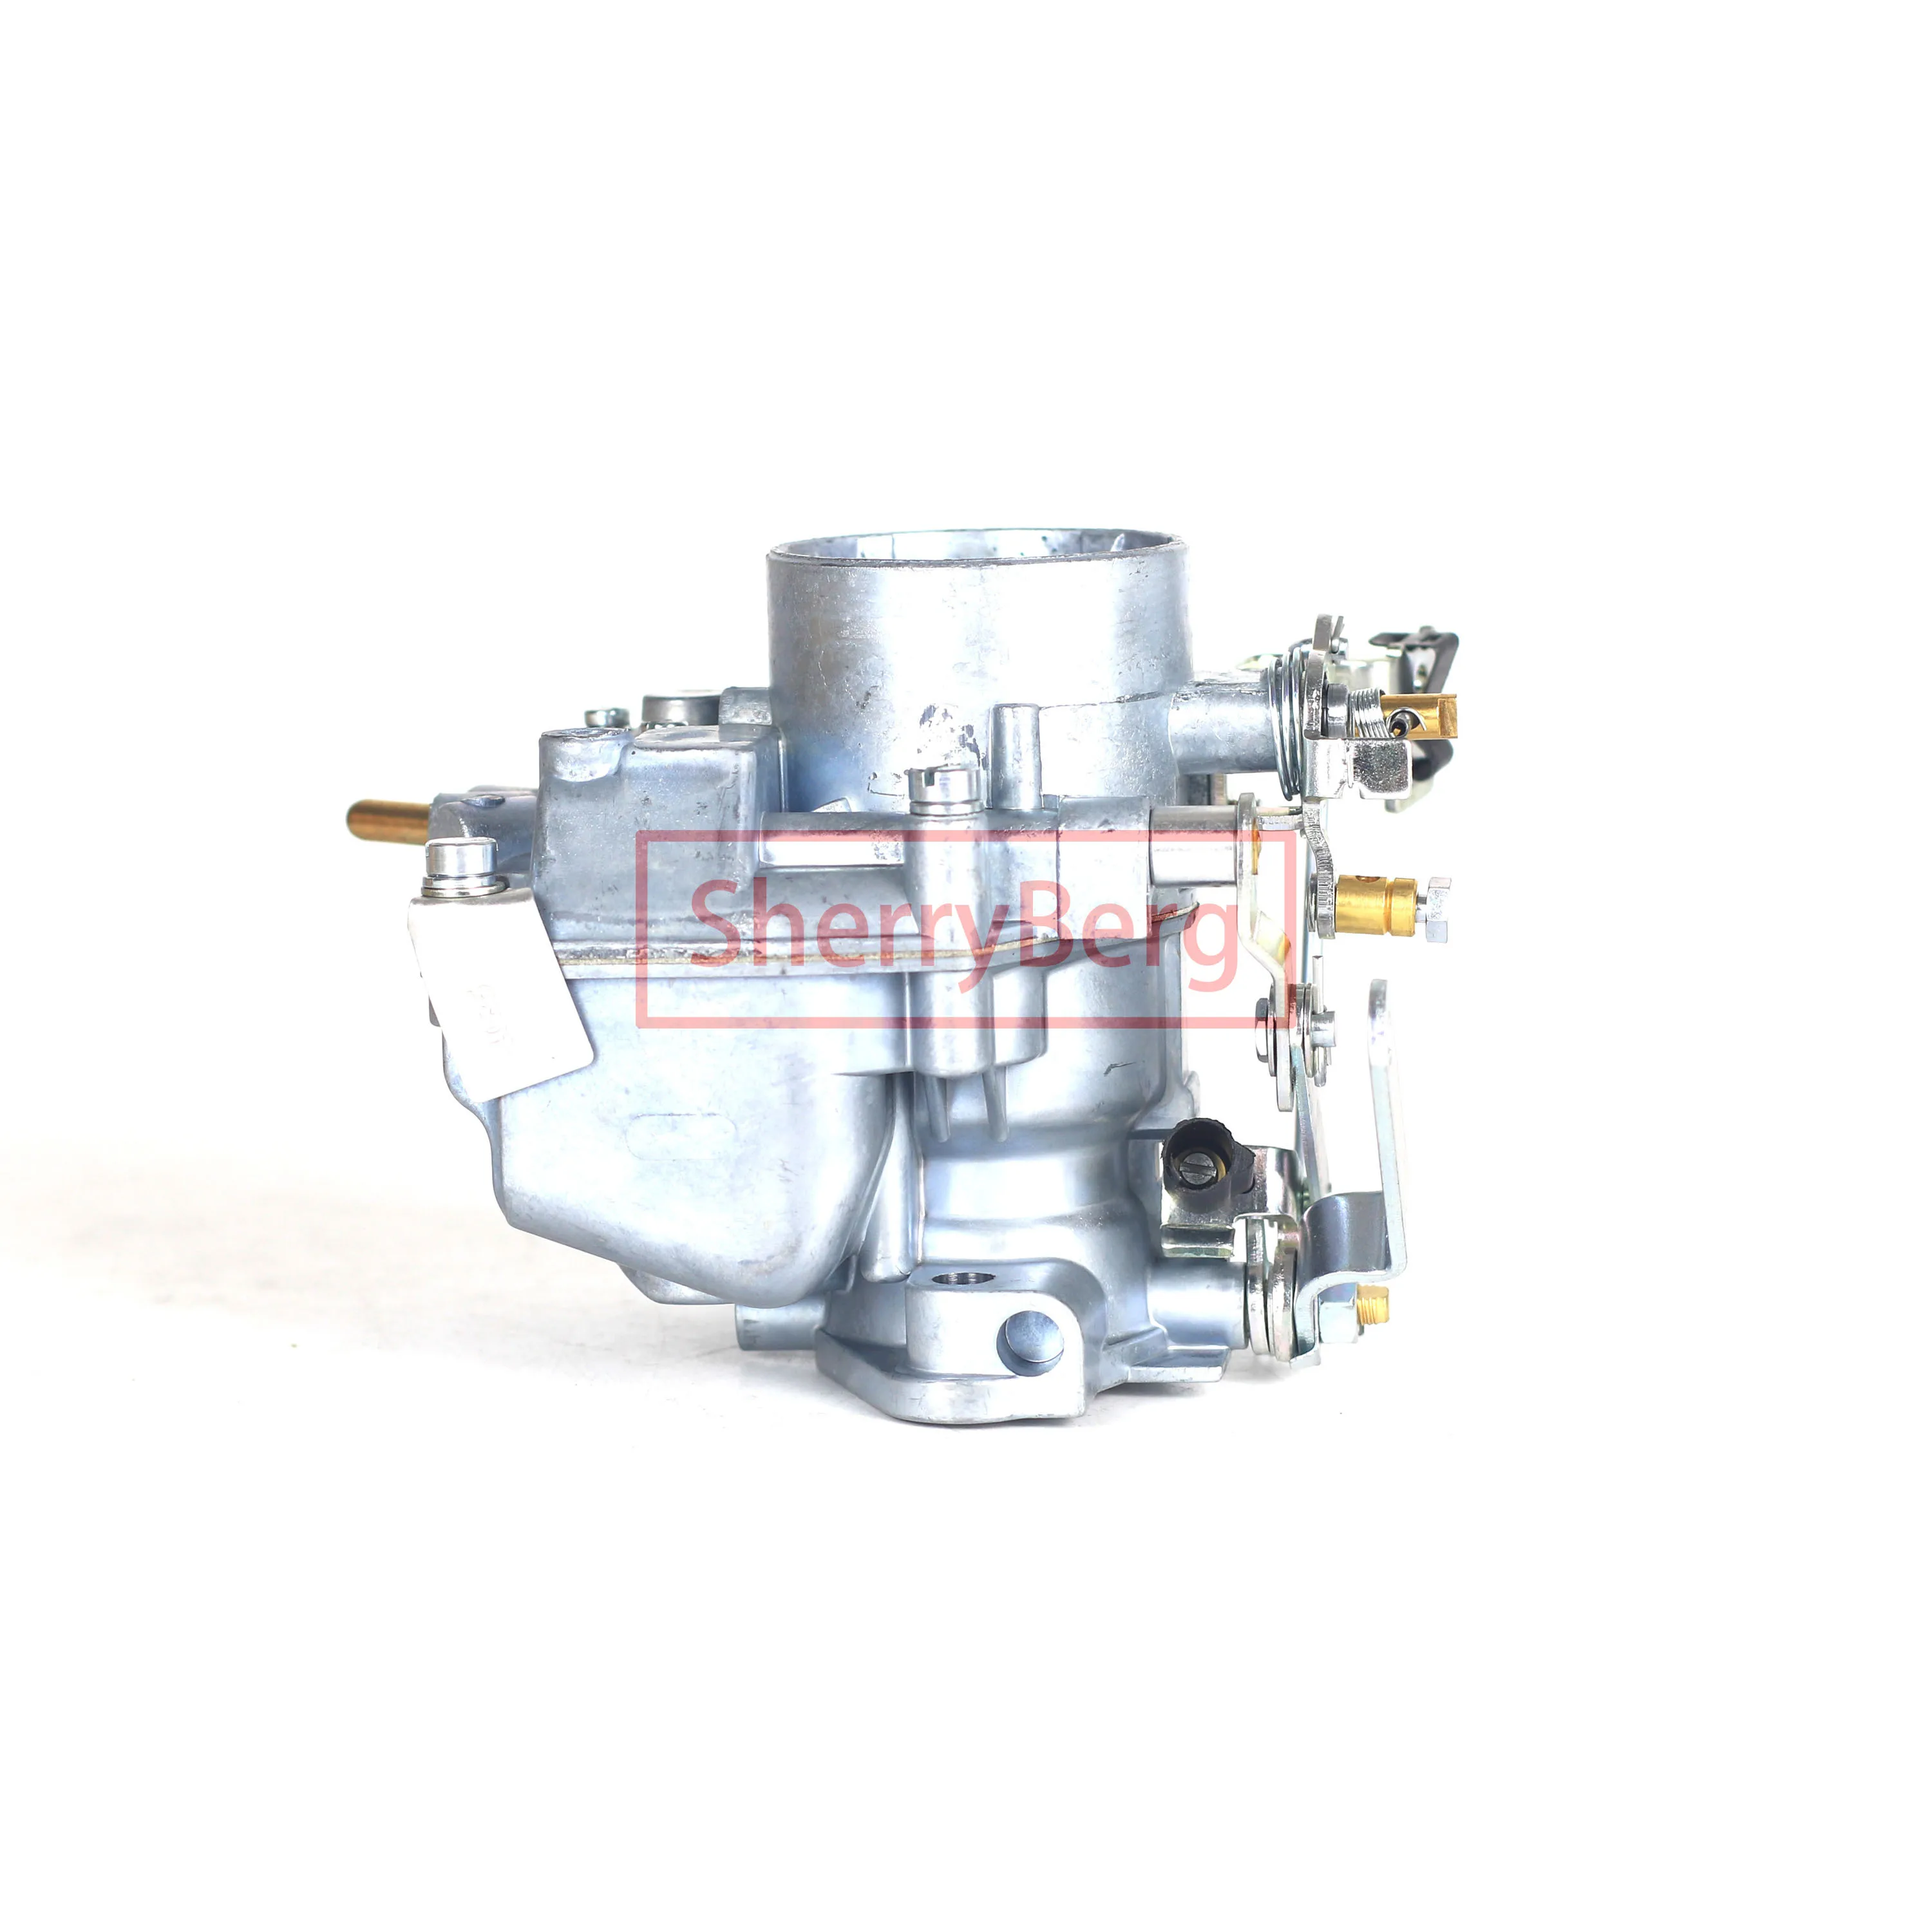 SherryBerg Carburetto Carby Carb Vergaser За SOLEX Zenith 36IV Карбуратор 2 1/4 2.25 Бензин за Land Rover Series 2,2a 3 Carbu Изображение 4